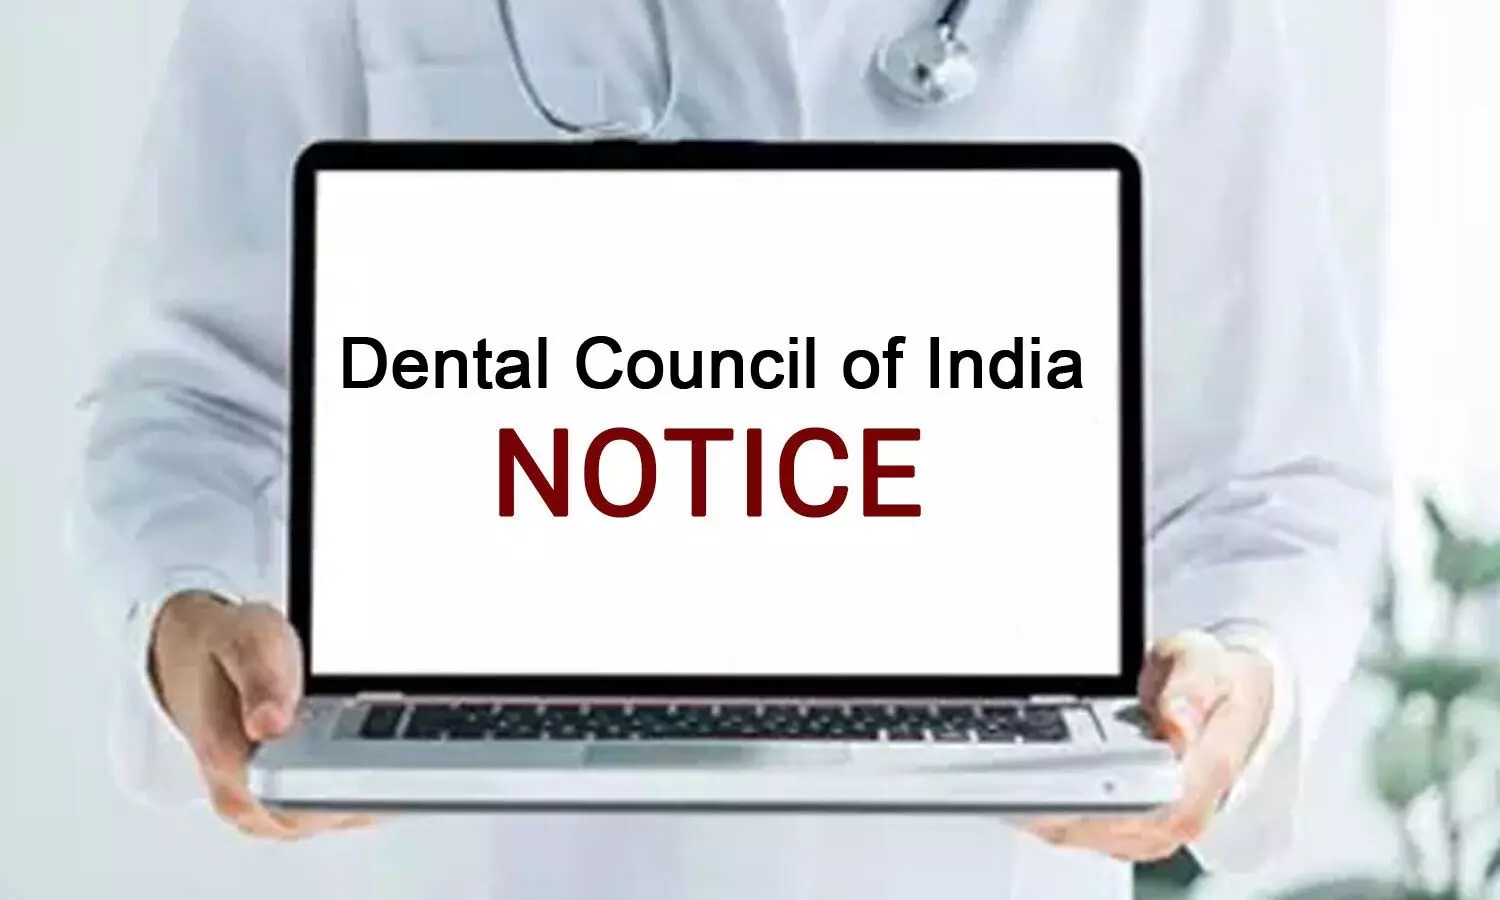 DCI directs dental colleges to upload details of BDS candidates admitted this year